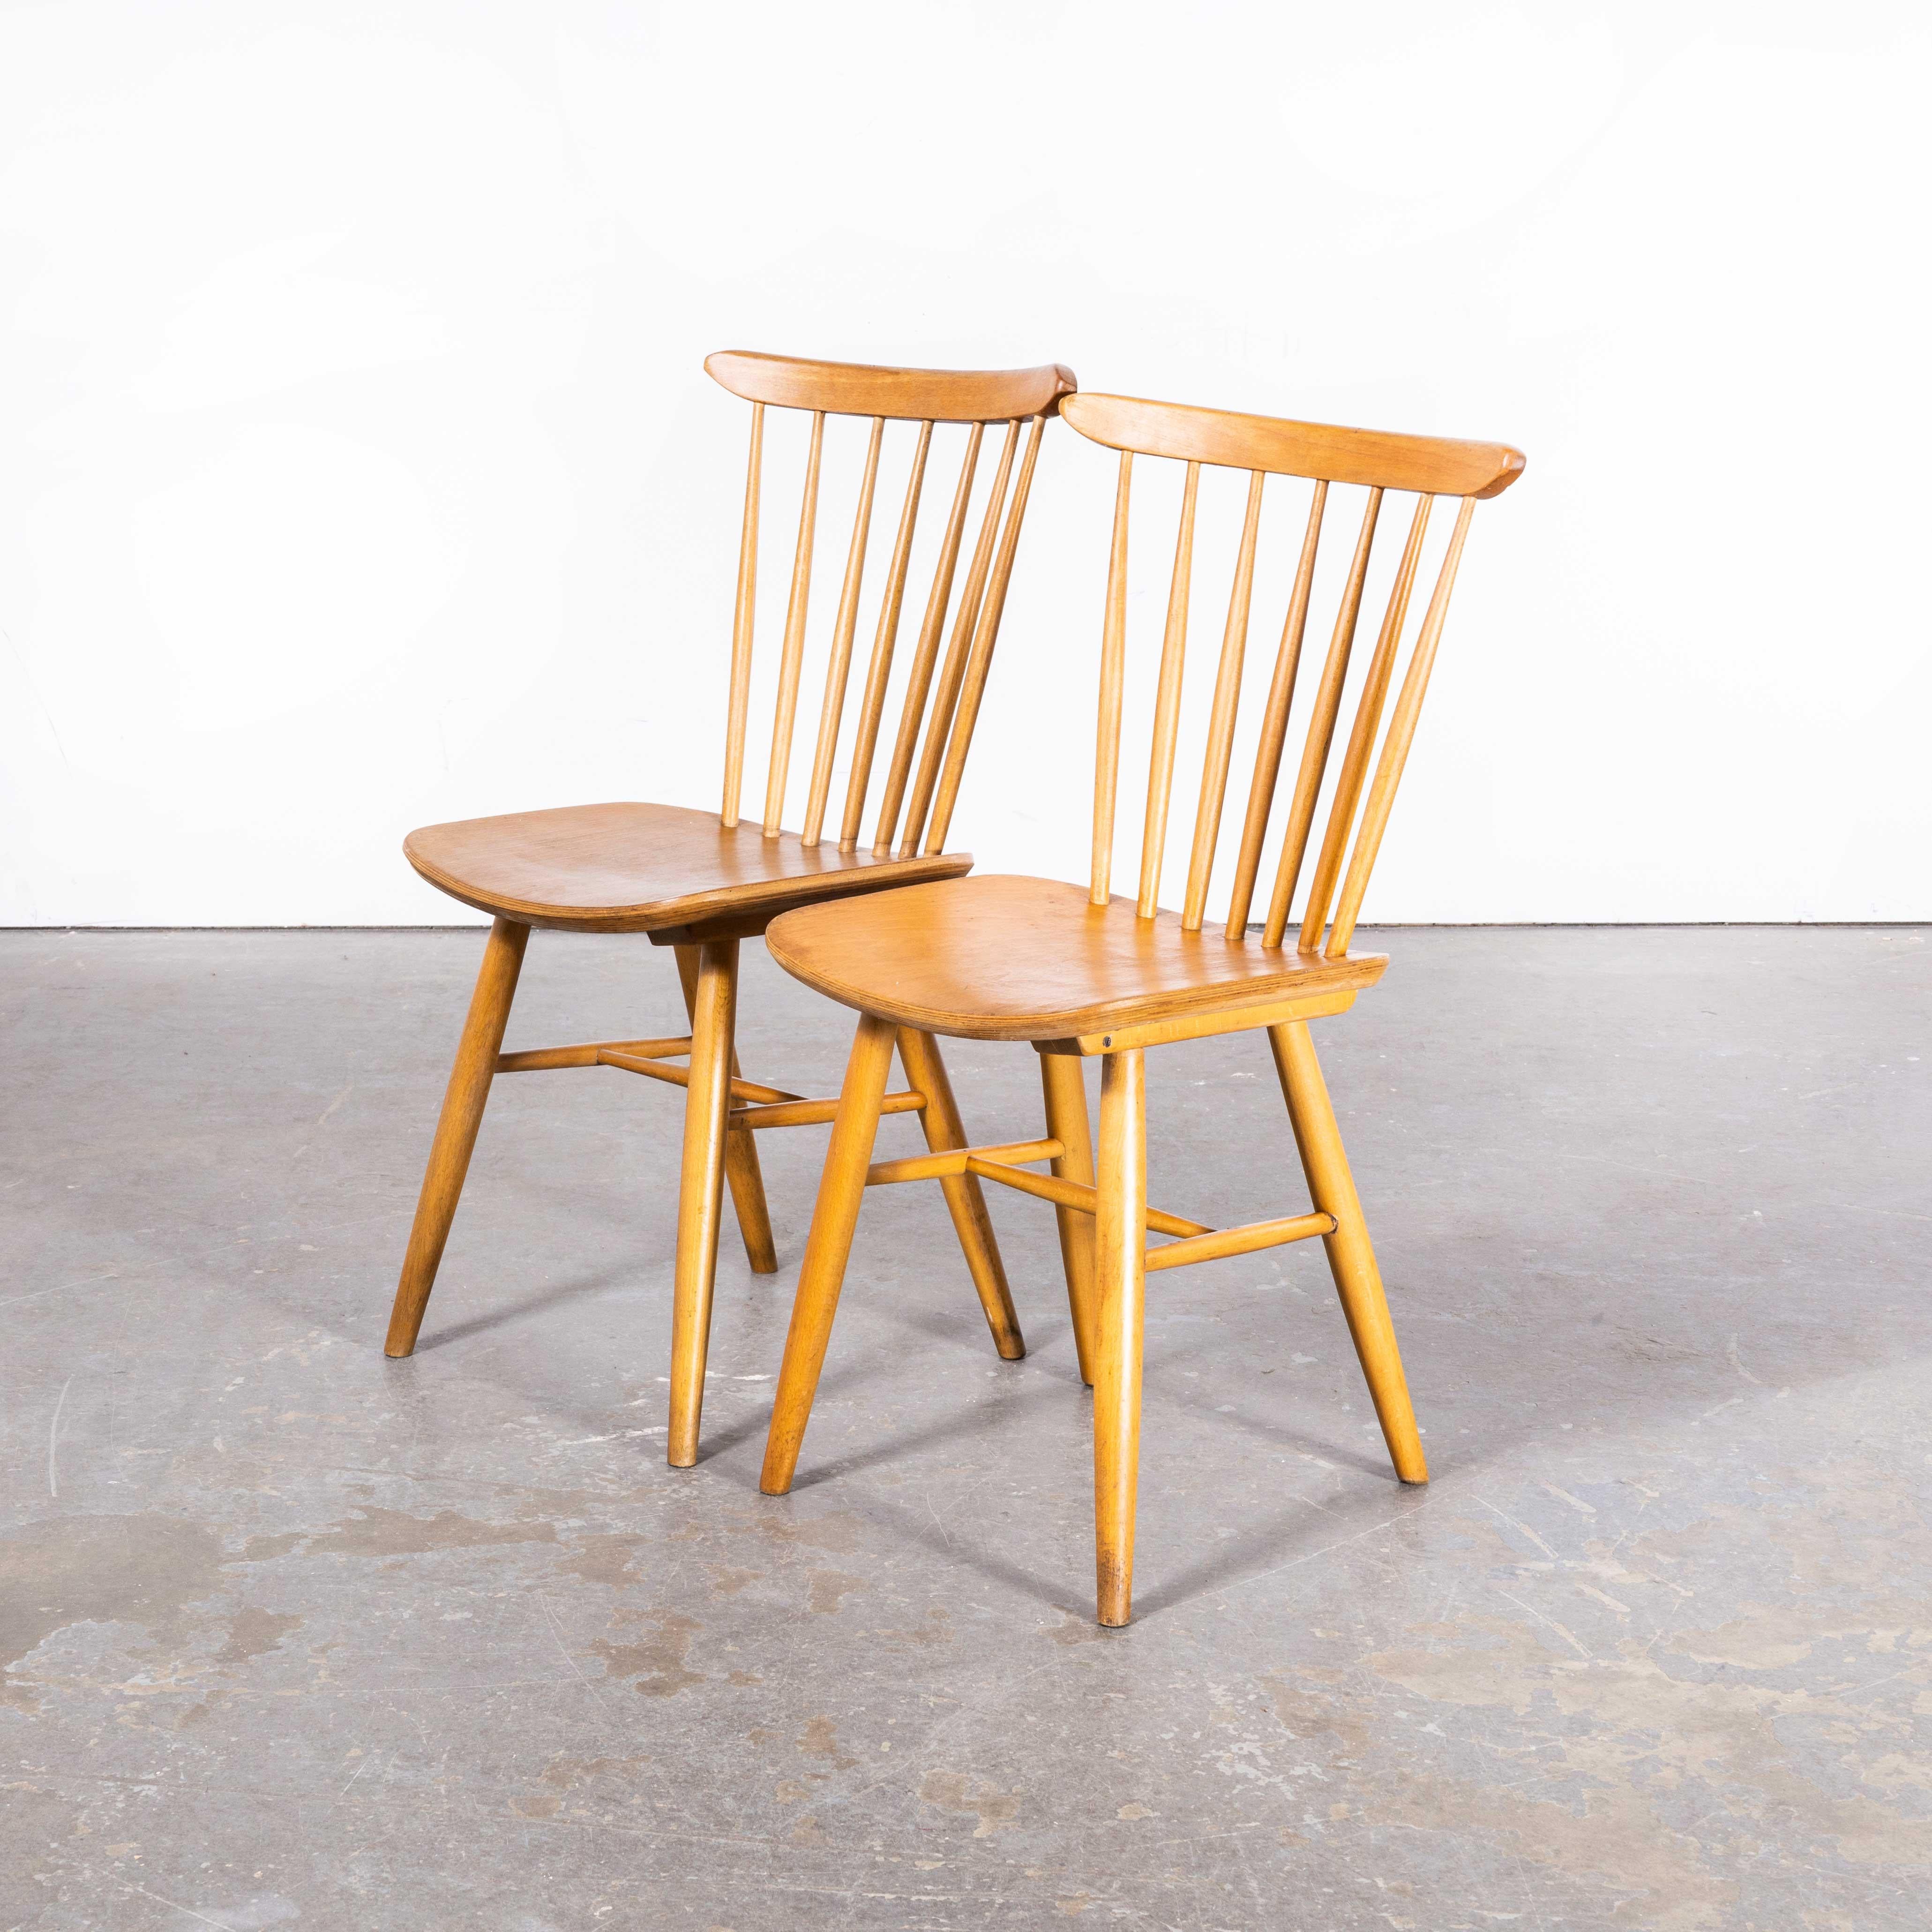 1950 Honey Oak Stickback Chairs, Saddle Seat, by Ton, Pair For Sale 5